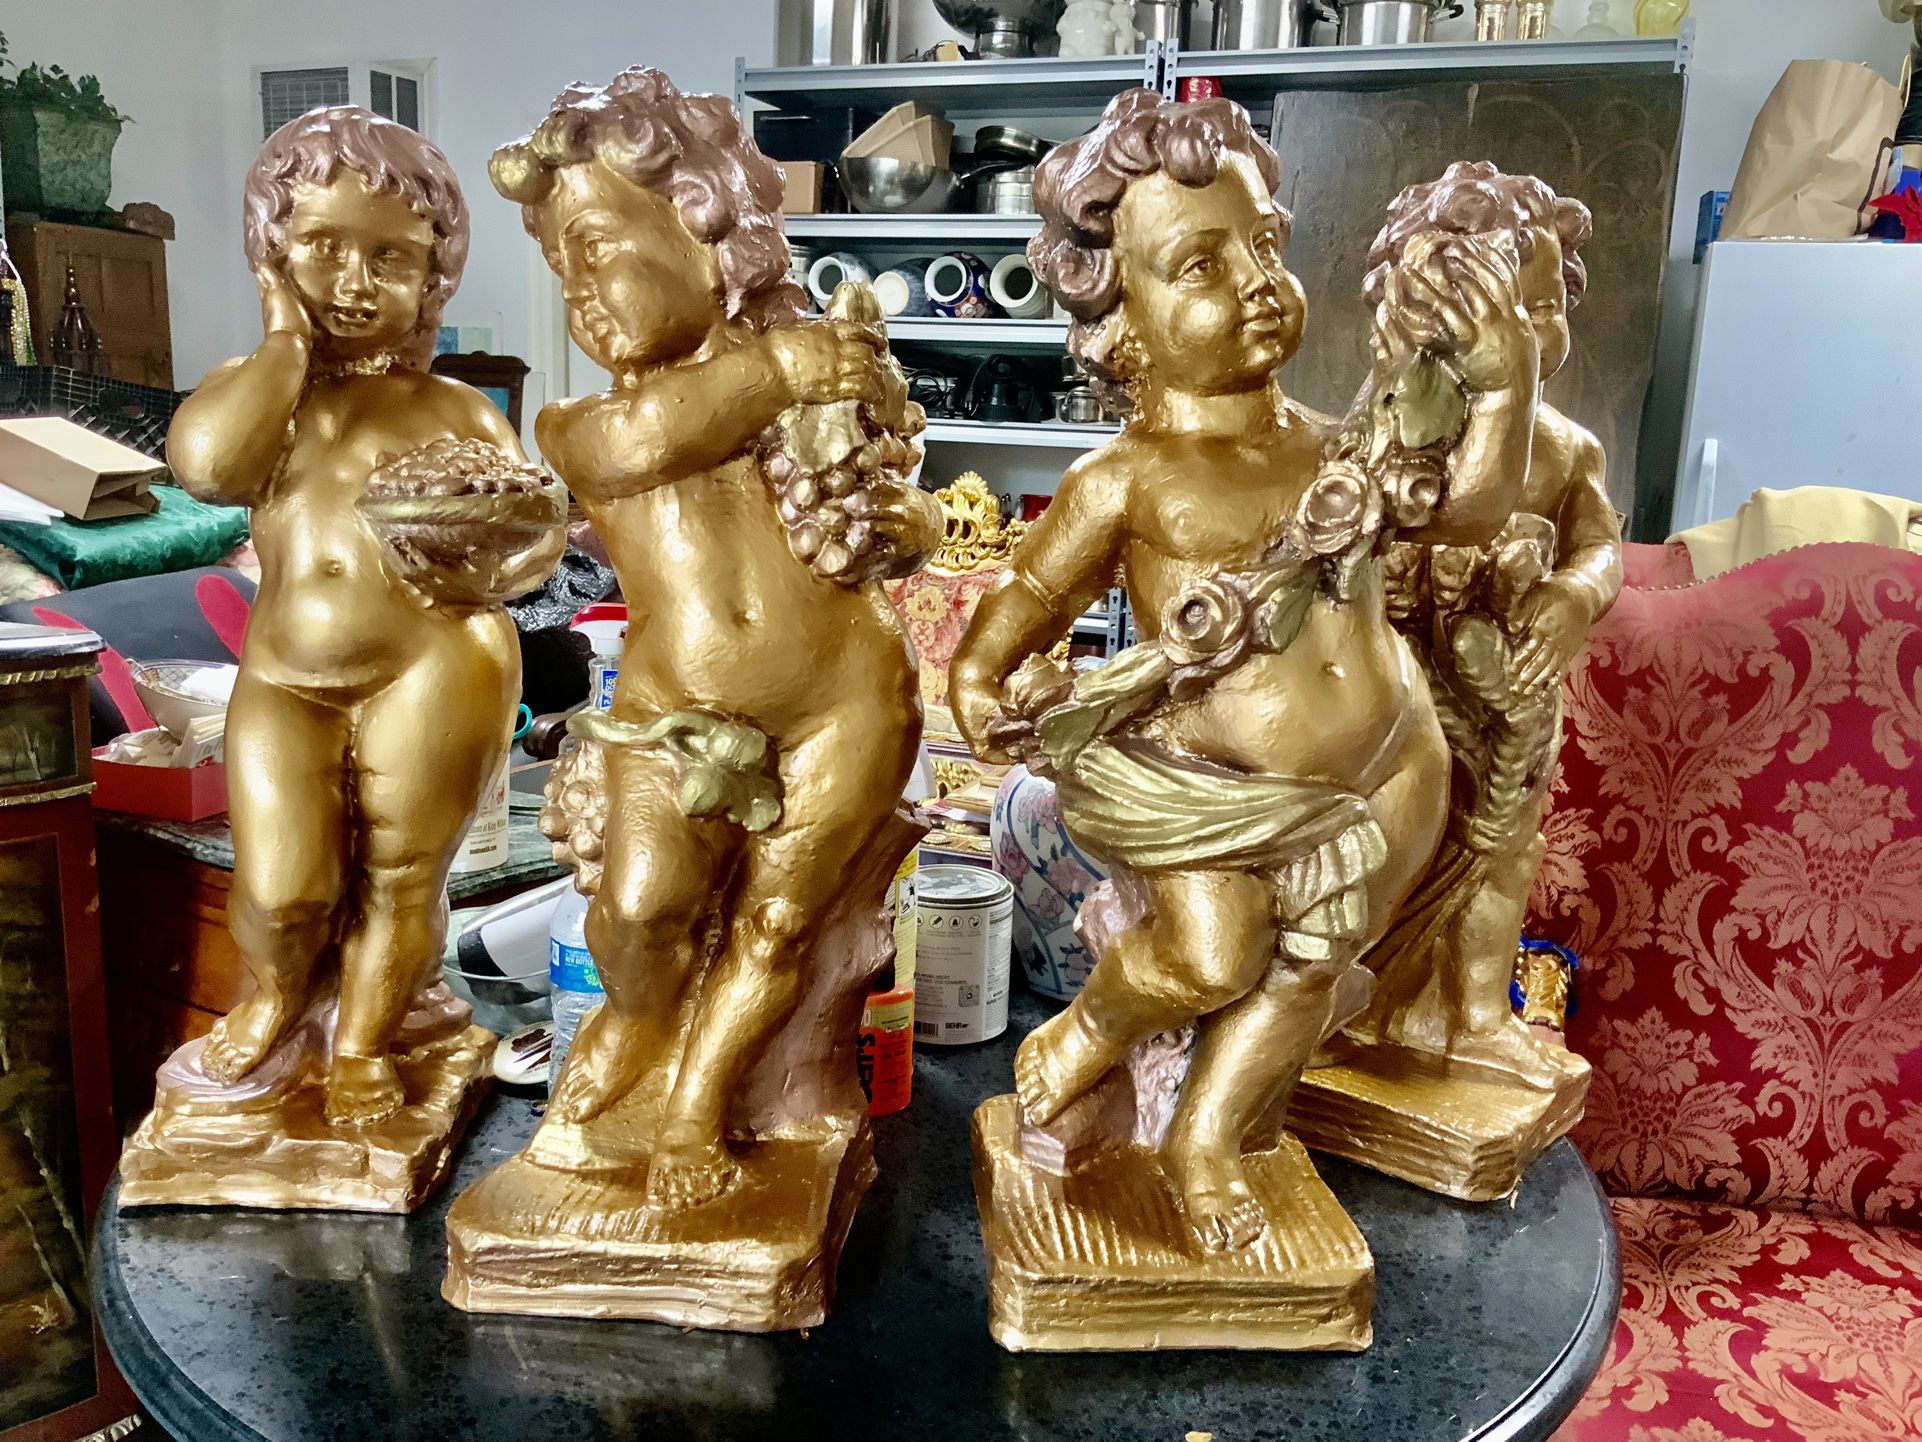 SET 4  30 INCHES TALL 4 SEASON. ALL YEAR HARD RESIN/PLASTER GOLD 